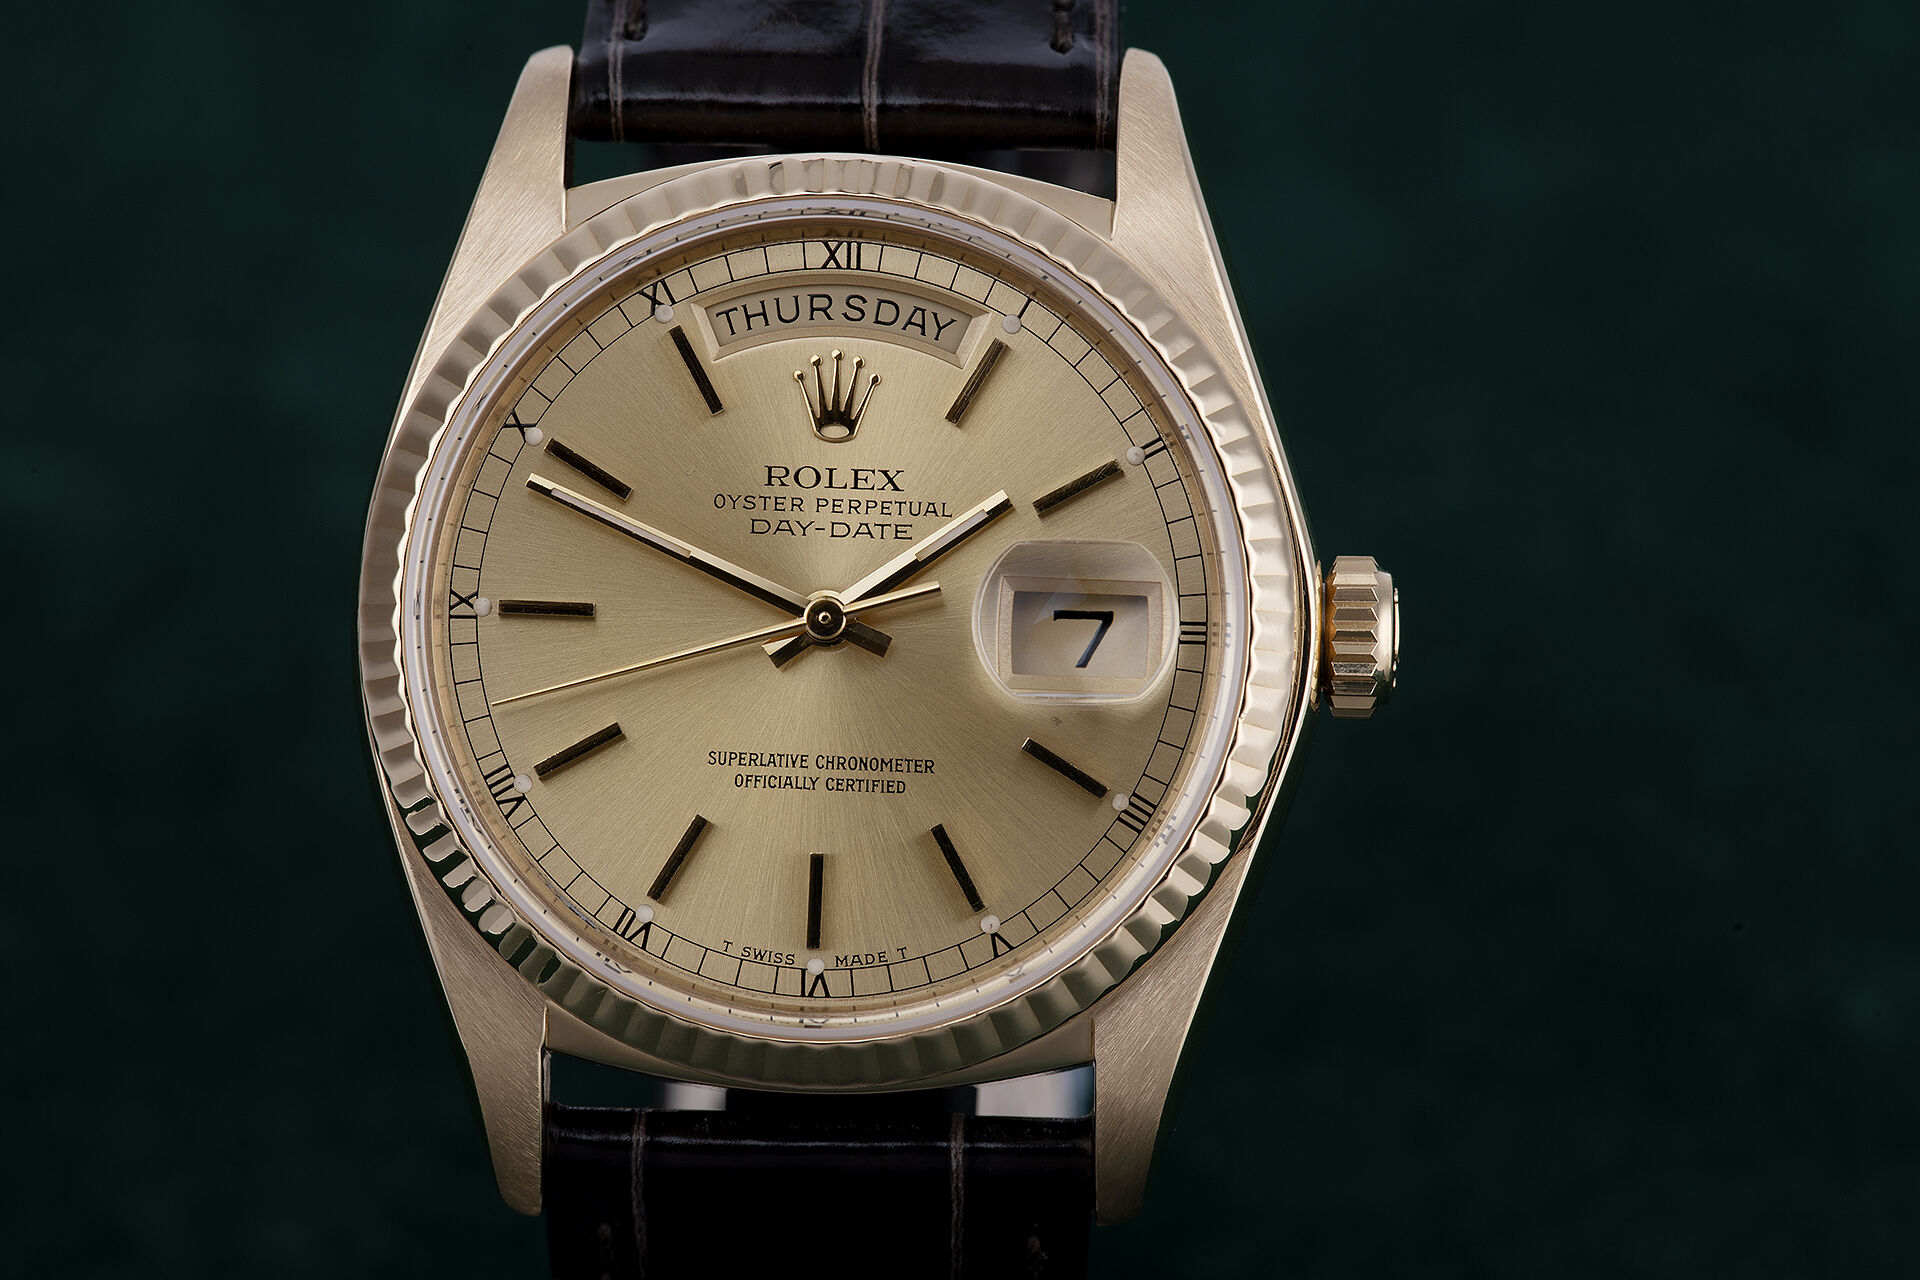 ref 18038 | Early Sapphire Glass Model | Rolex Day-Date